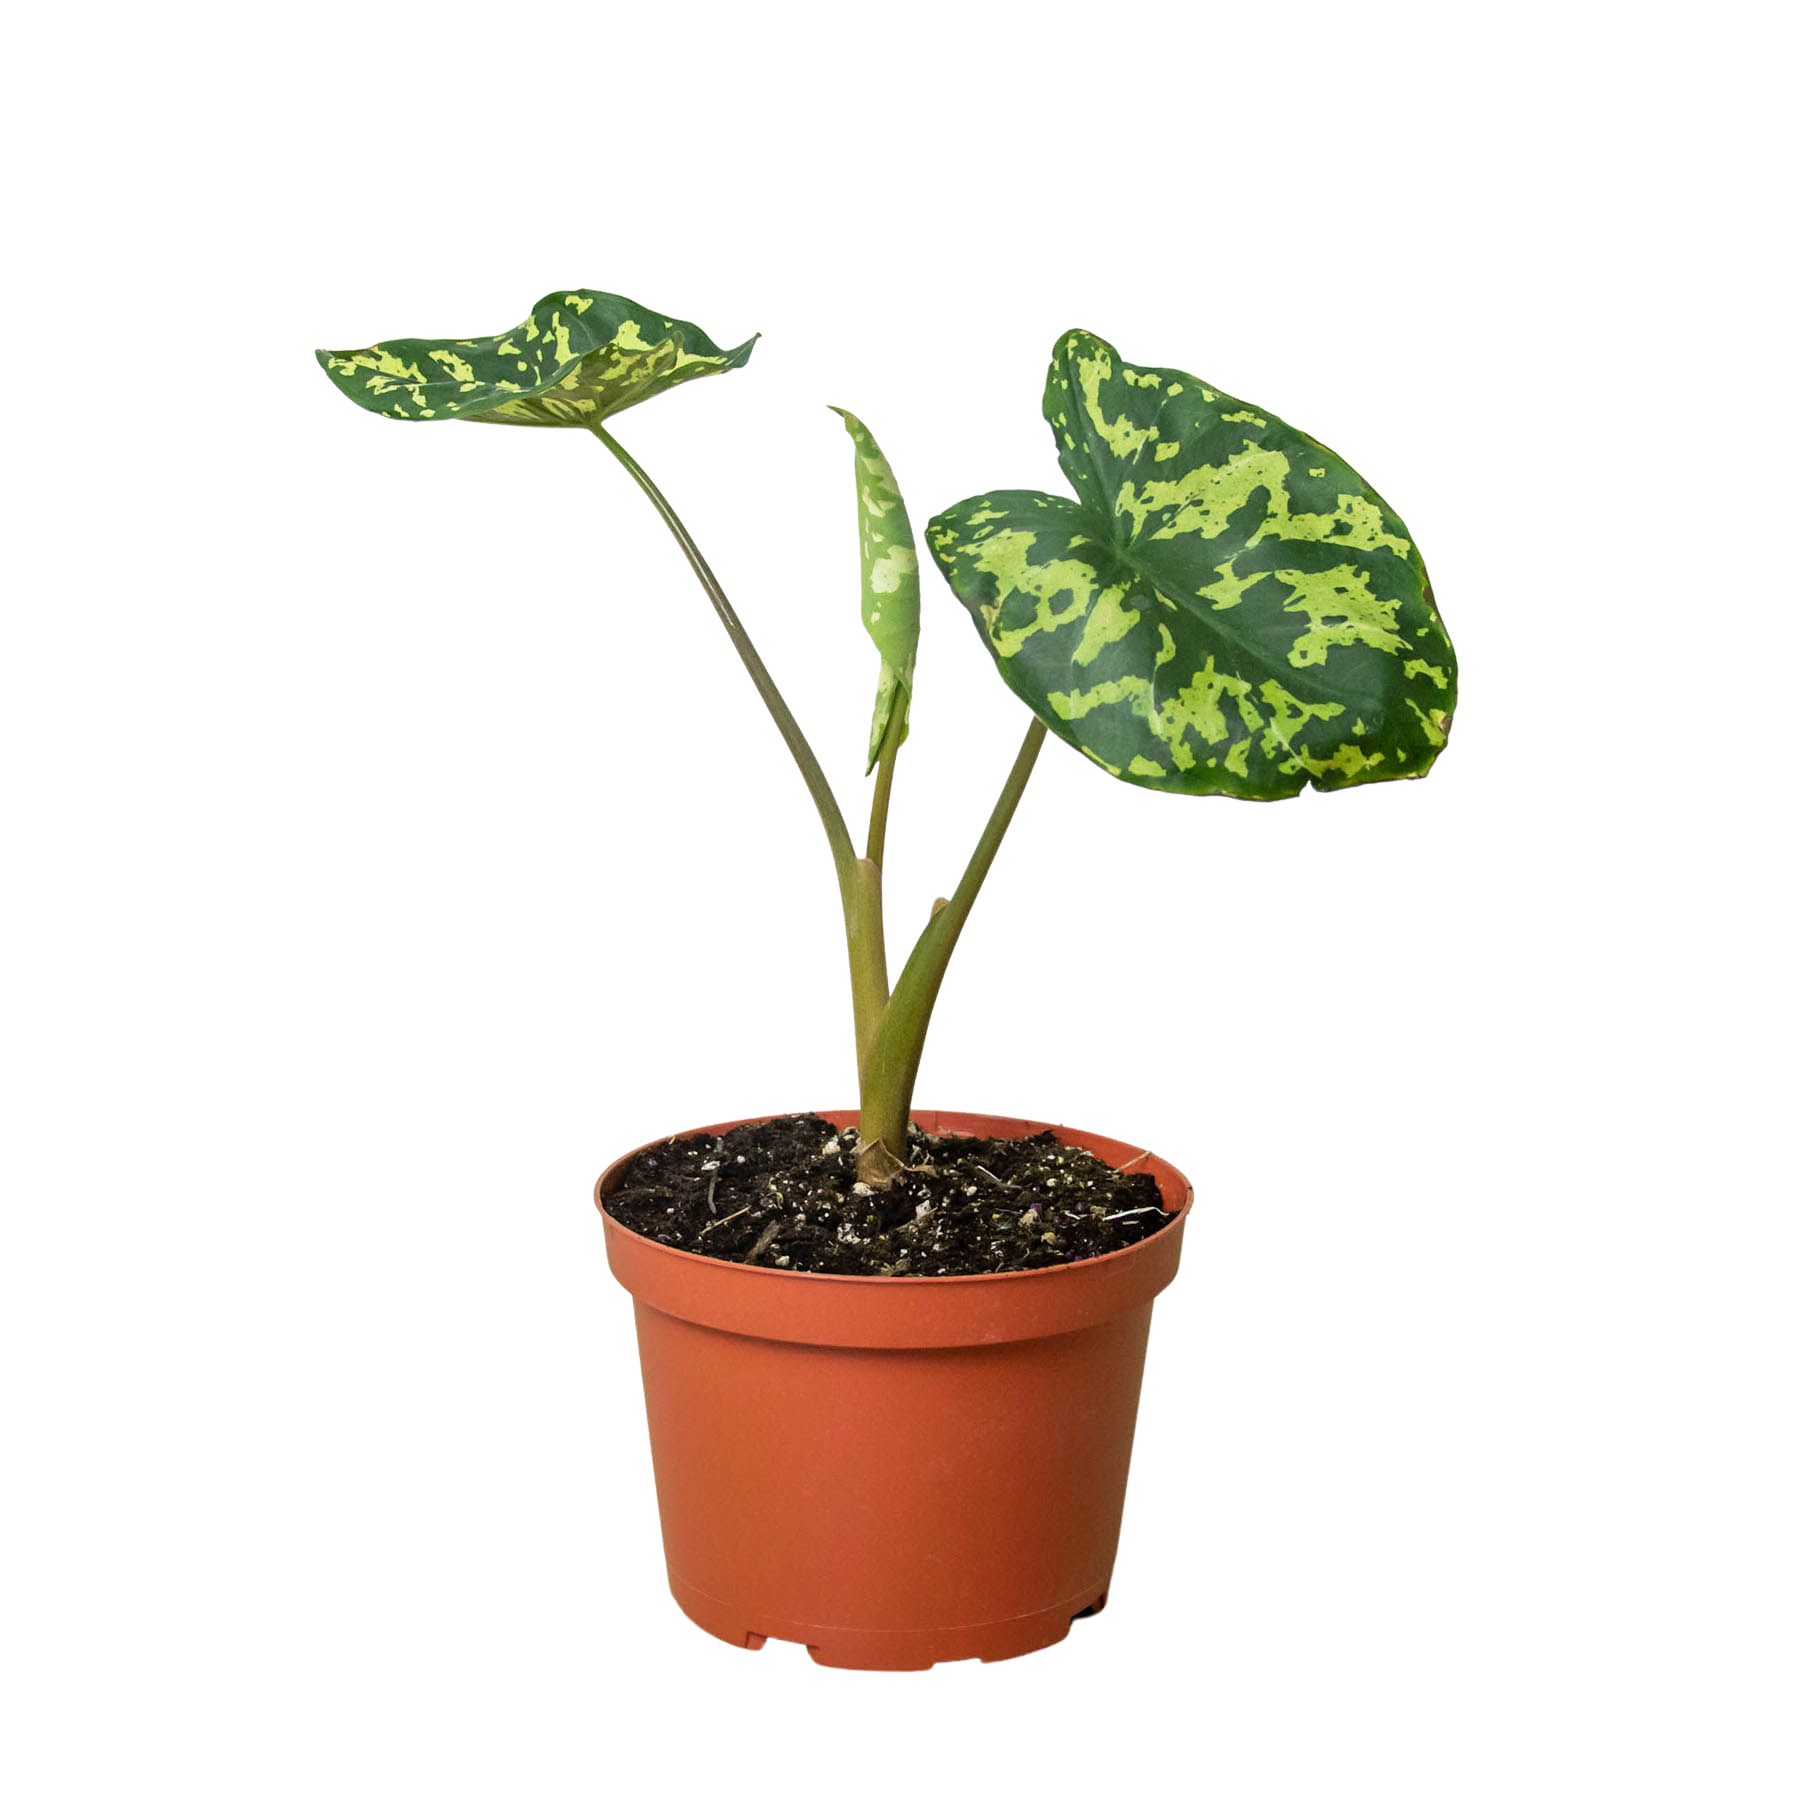 A small plant in a pot on a white background at a plant nursery.